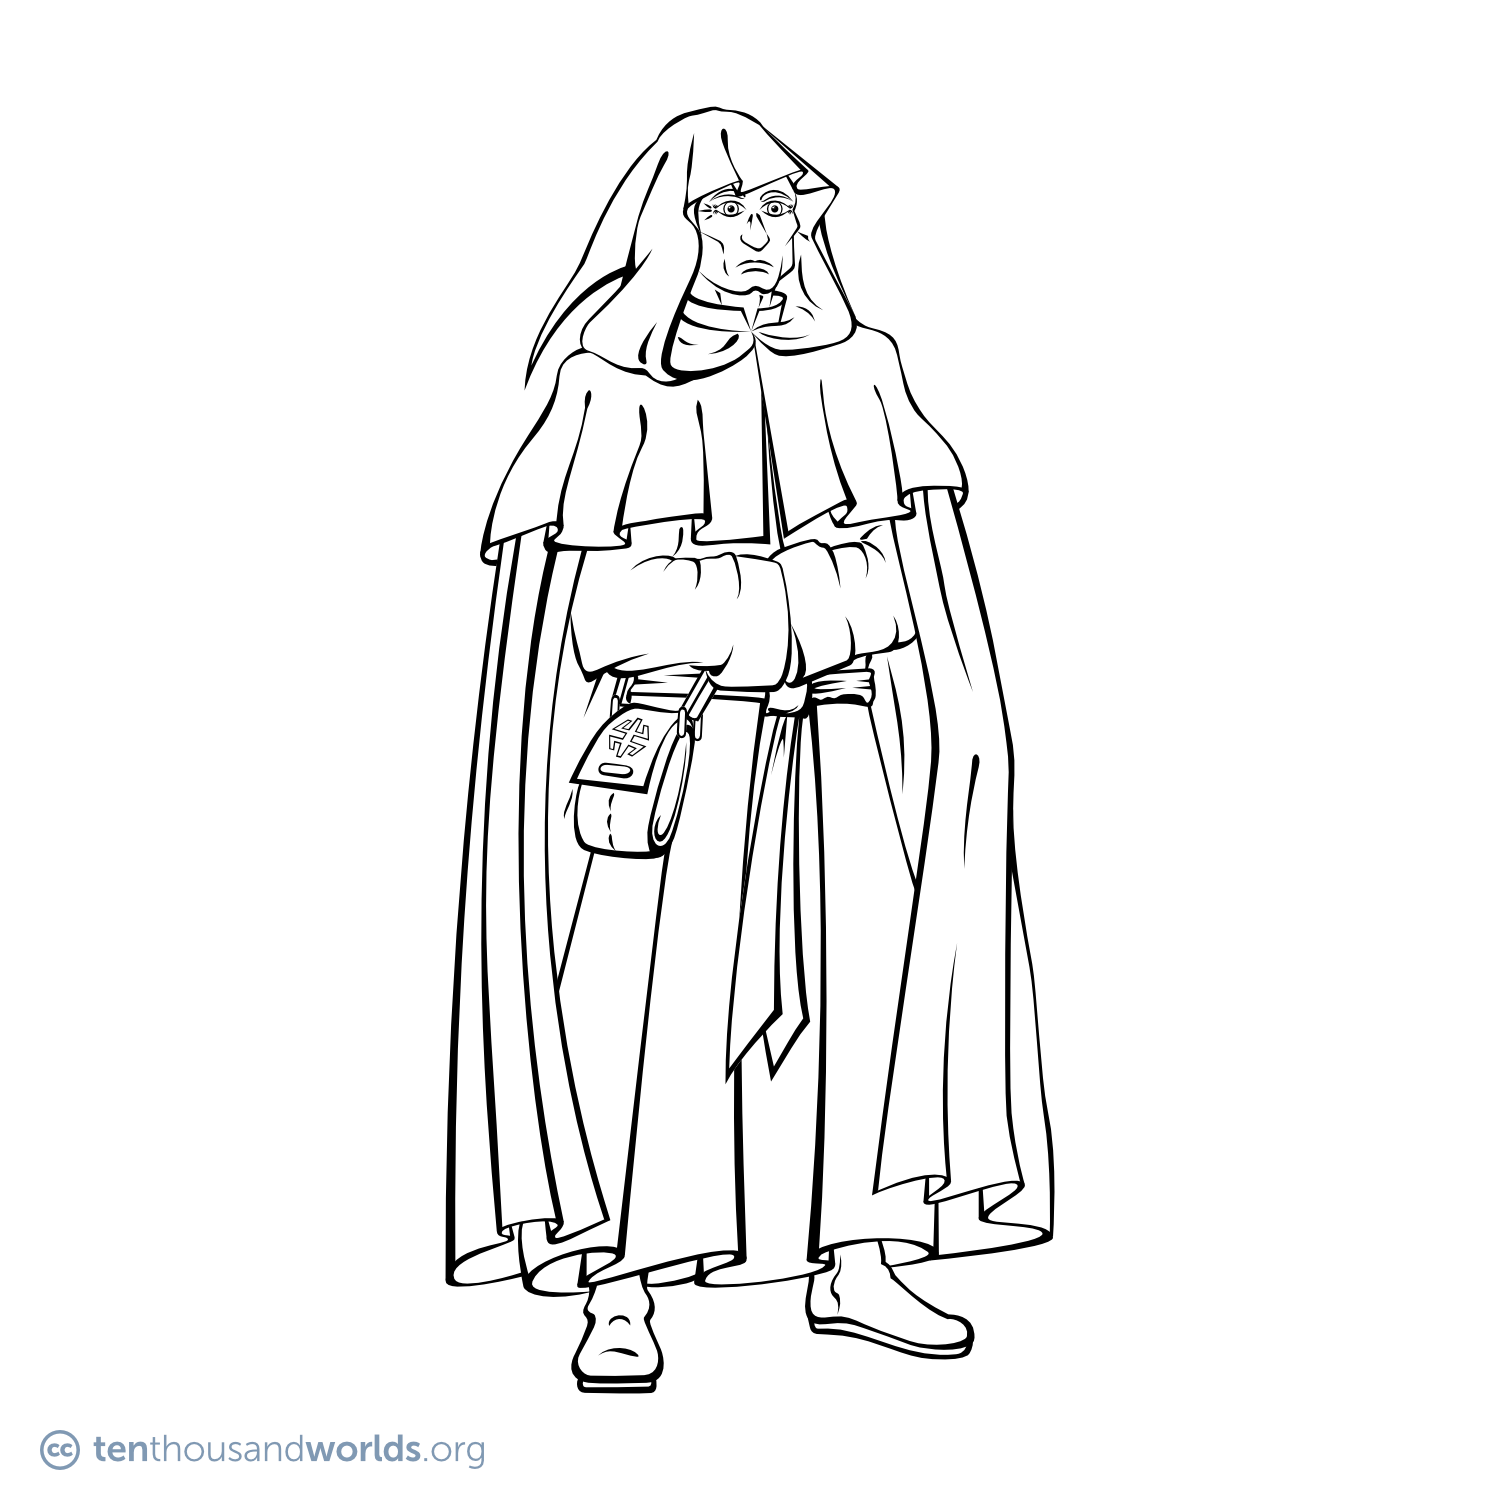 An ink outline of a man with sharp features, dressed in a long robe with a hooded cloak, carrying a small satchel at his side that’s marked with a single rune.